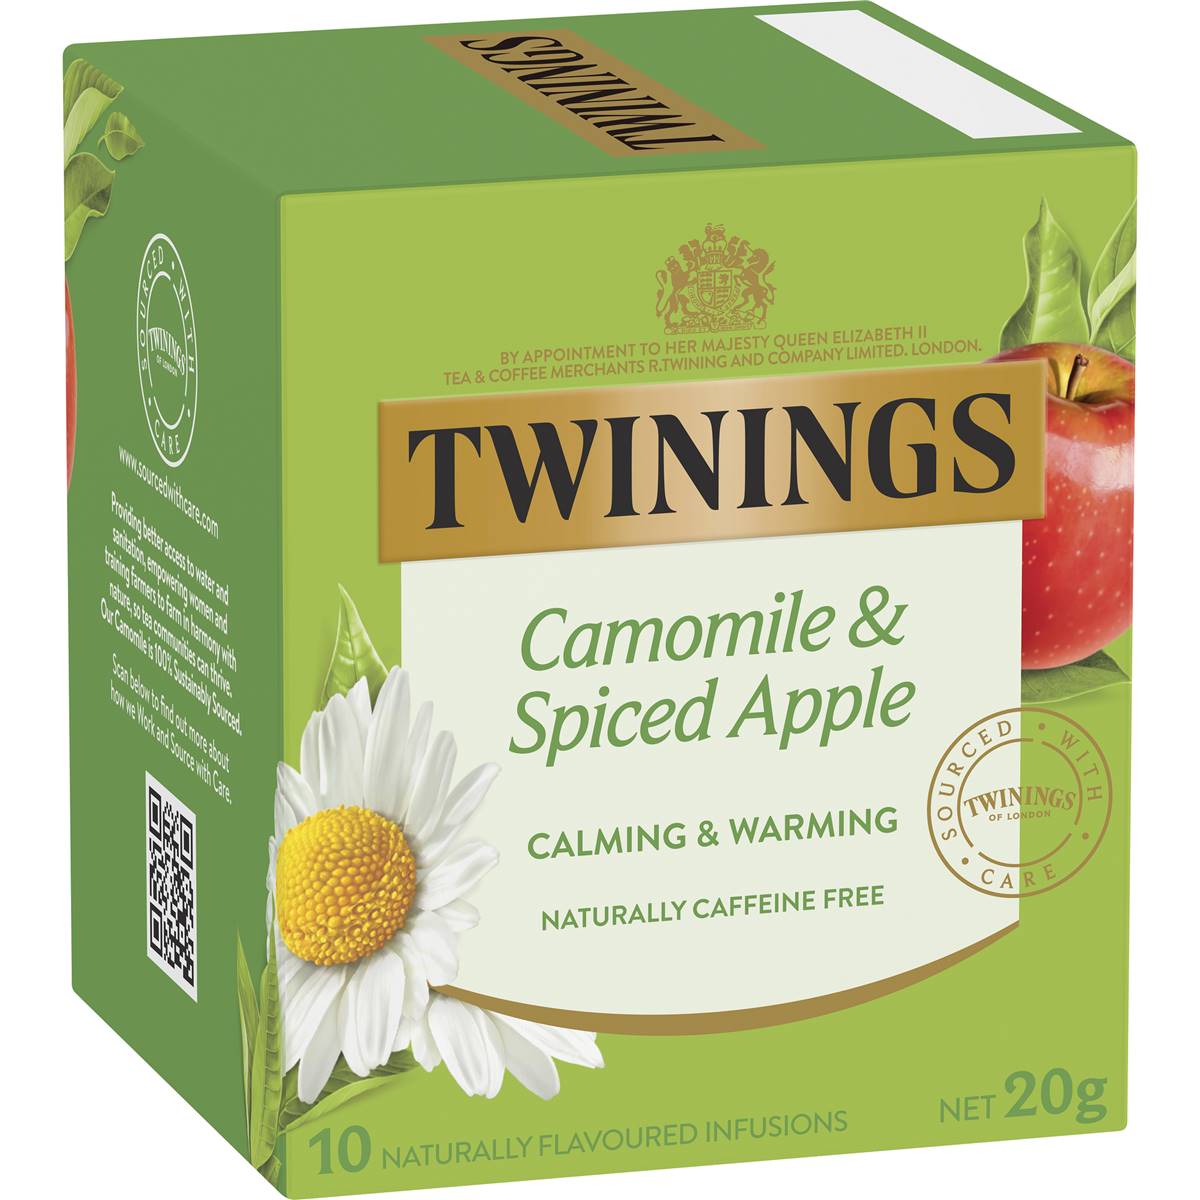 Calories in Twinings Camomile & Spiced Apple Tea Bags